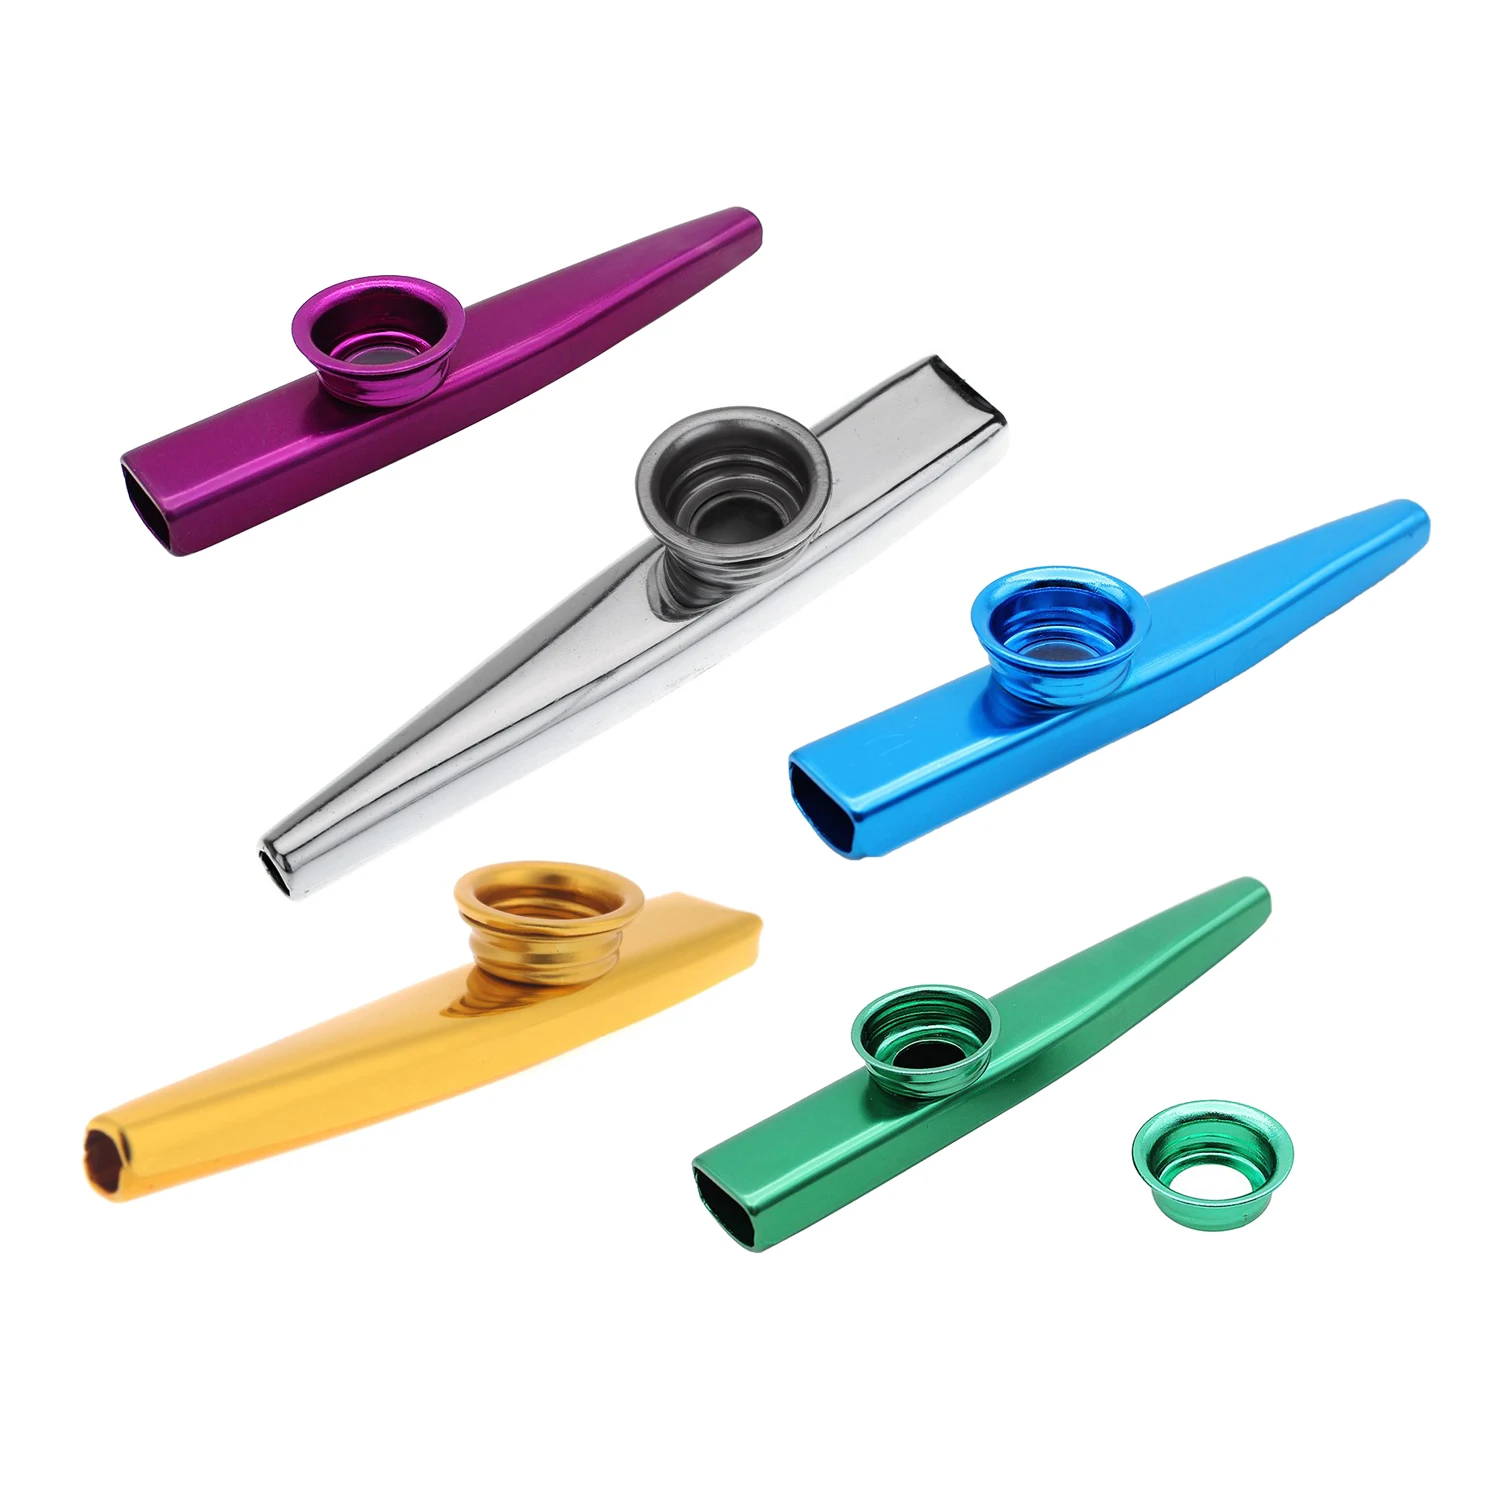 

Kazoo Aluminum alloy Metal with 5 pcs Gifts Flute Diaphragm for Children Music-lovers